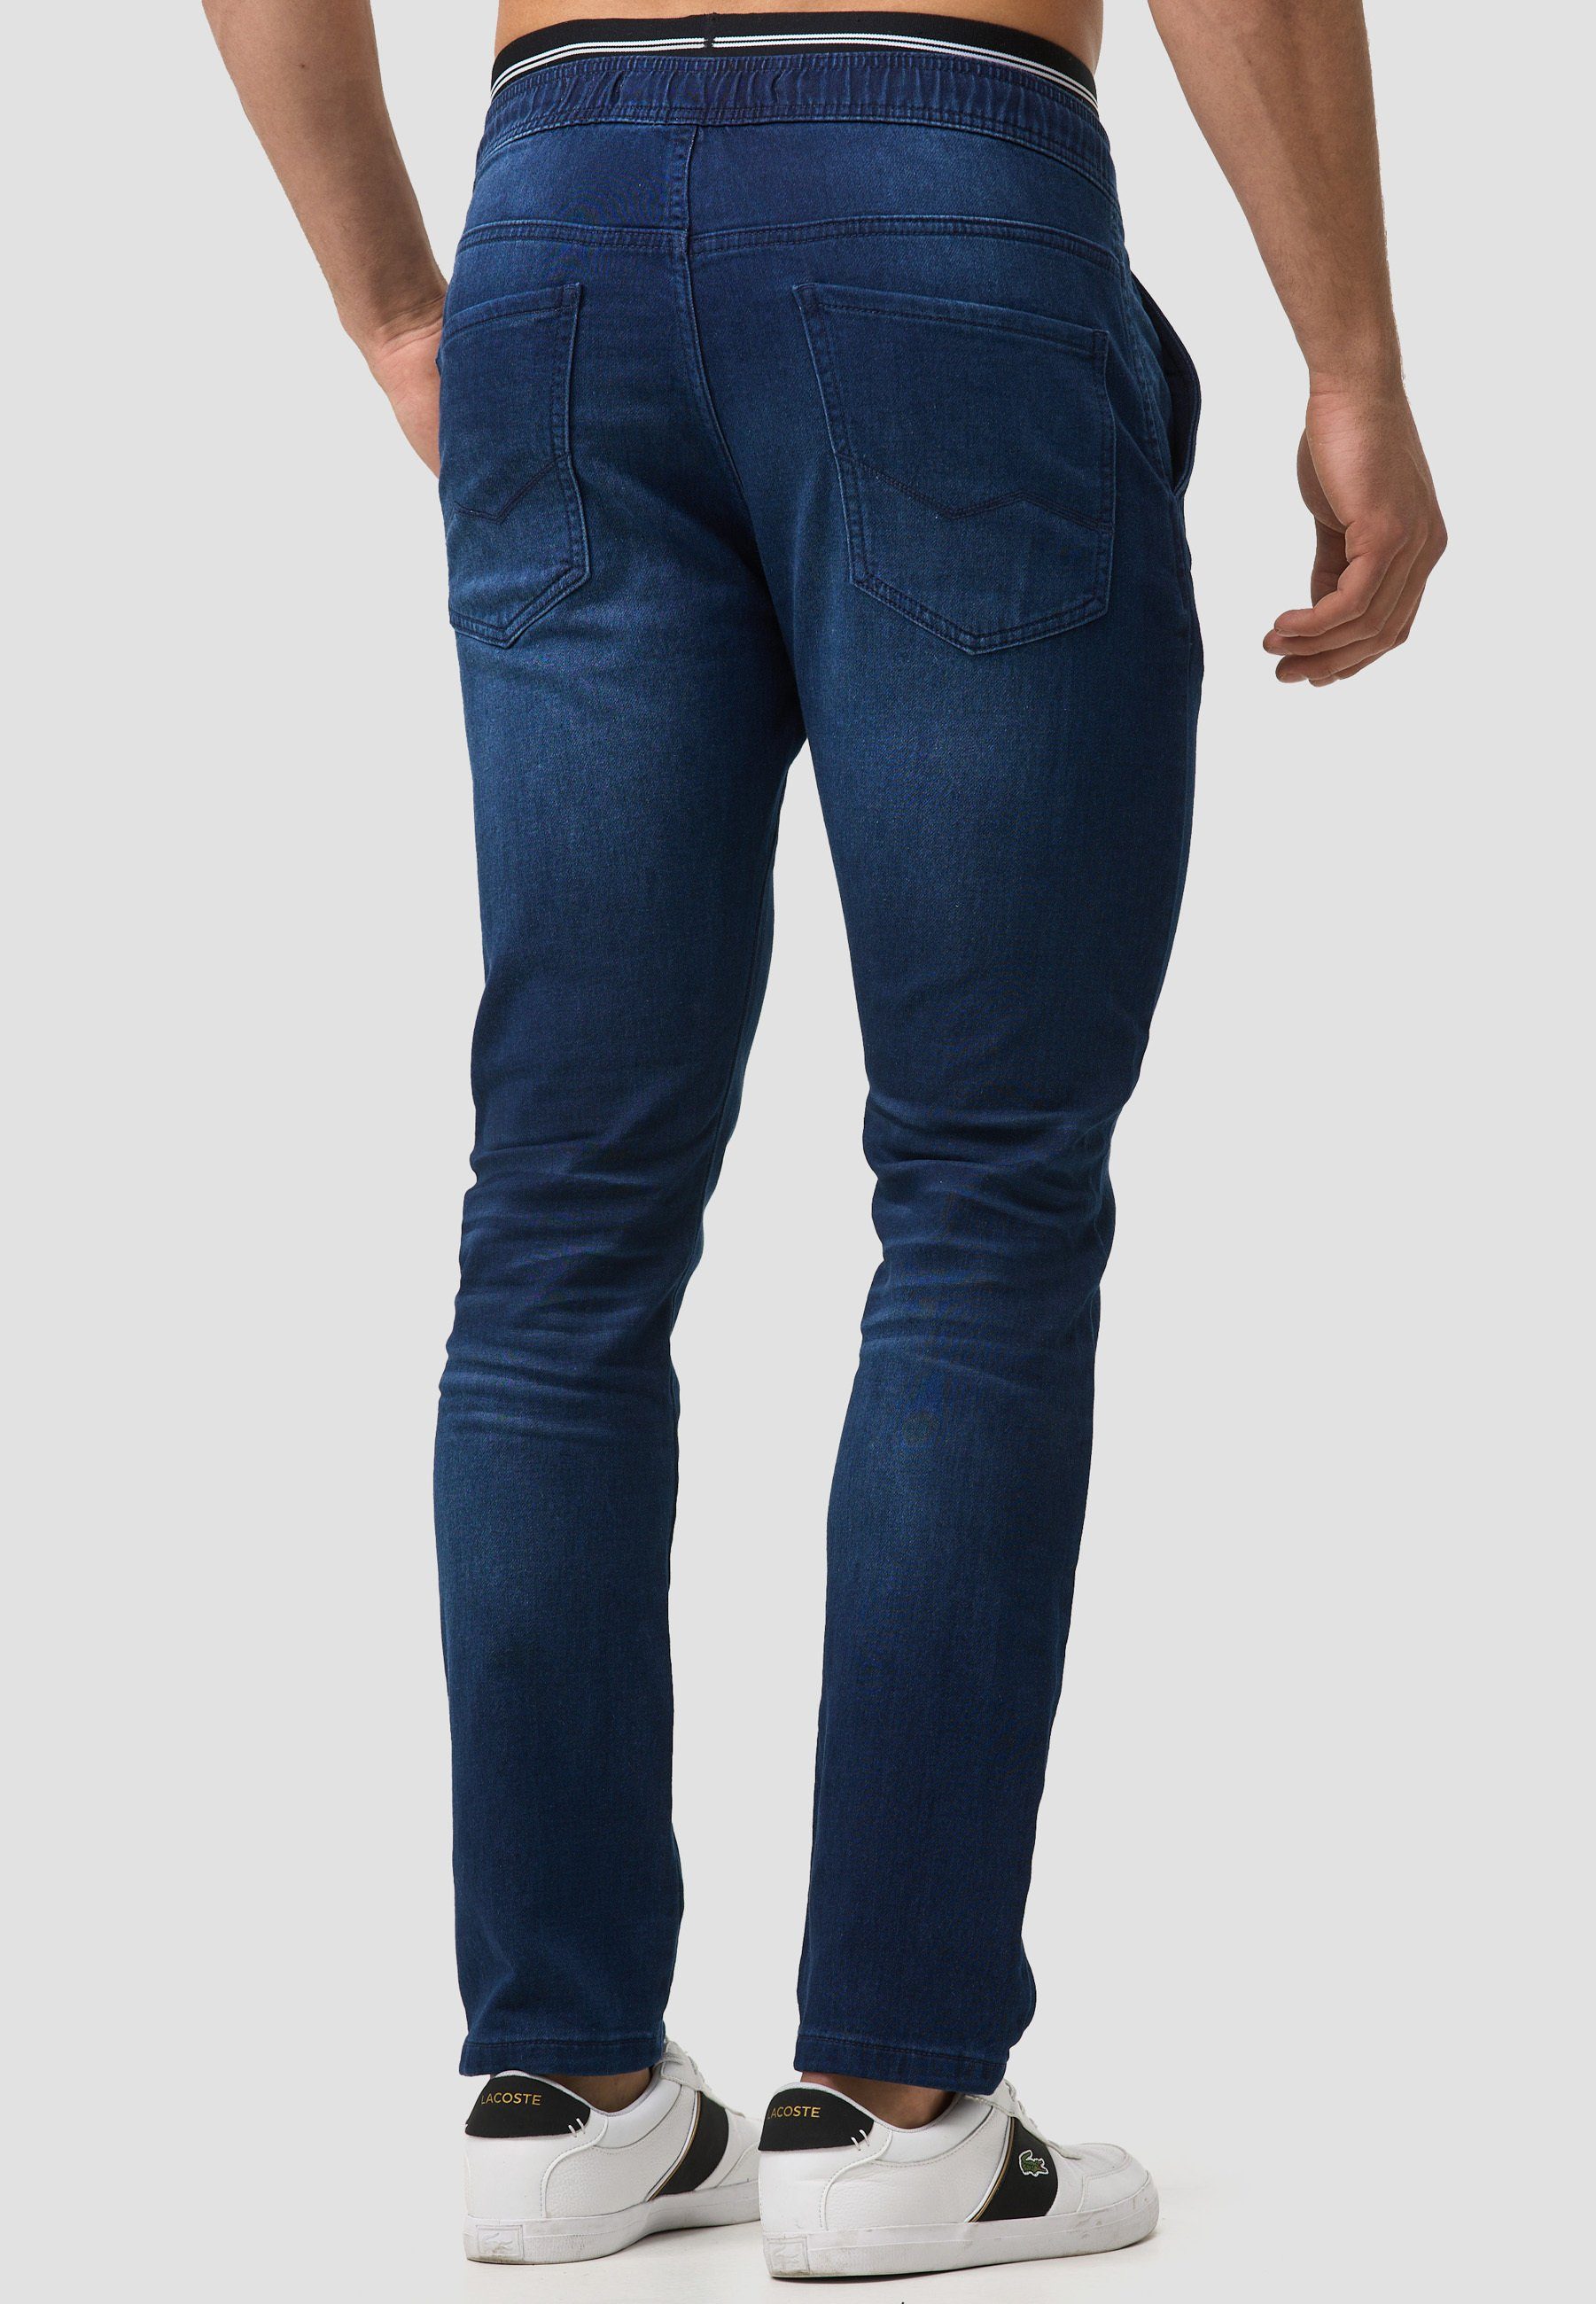 Jeans Bequeme Indicode Blue Alban